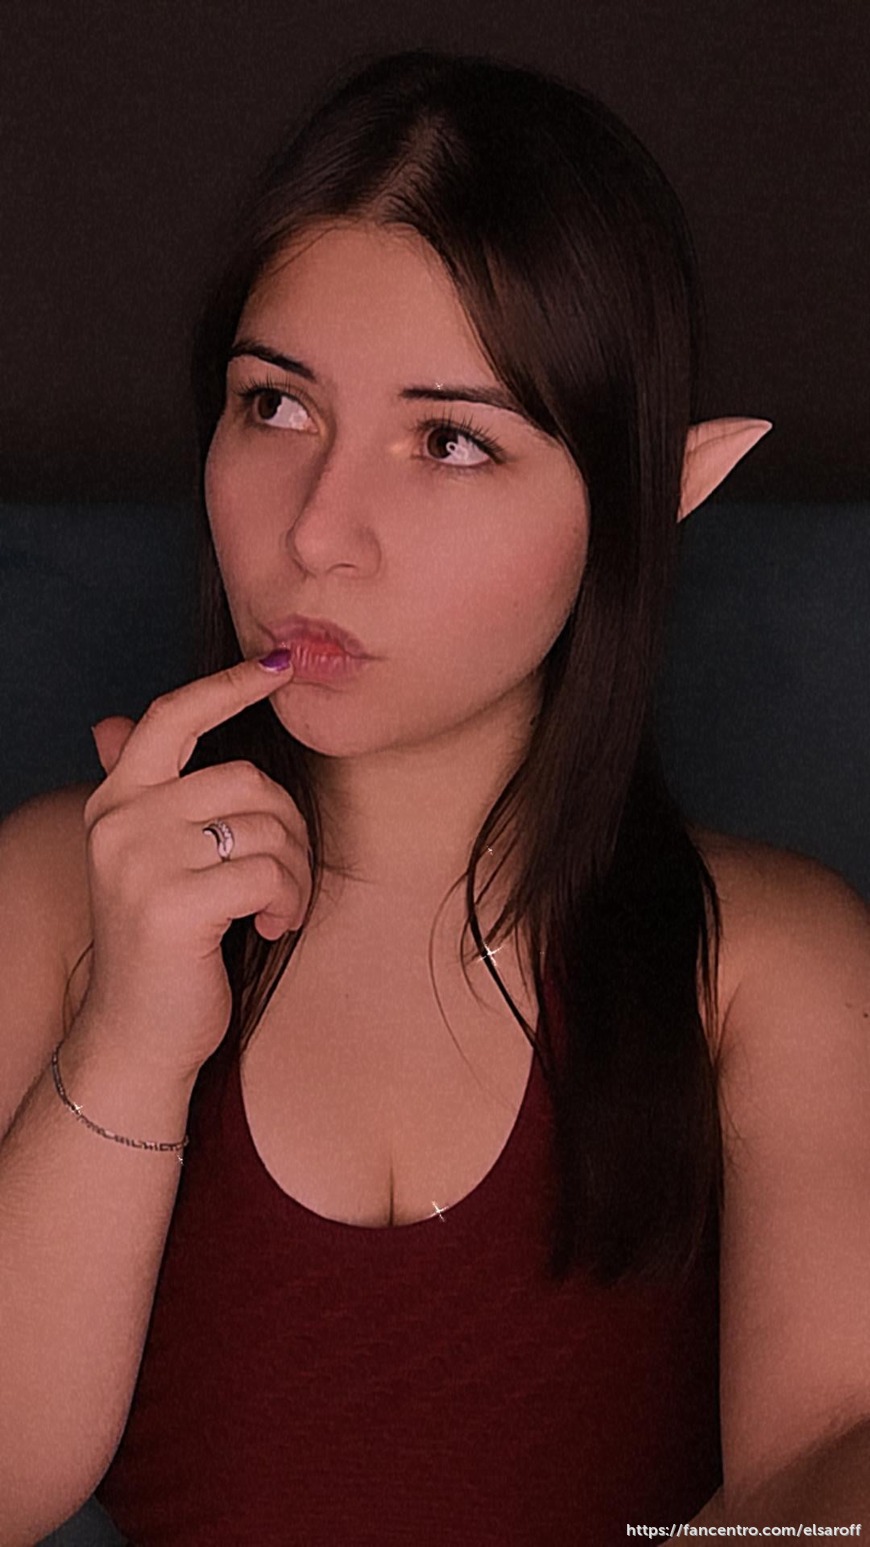 Today I tried on a new image) horny elf) - post image